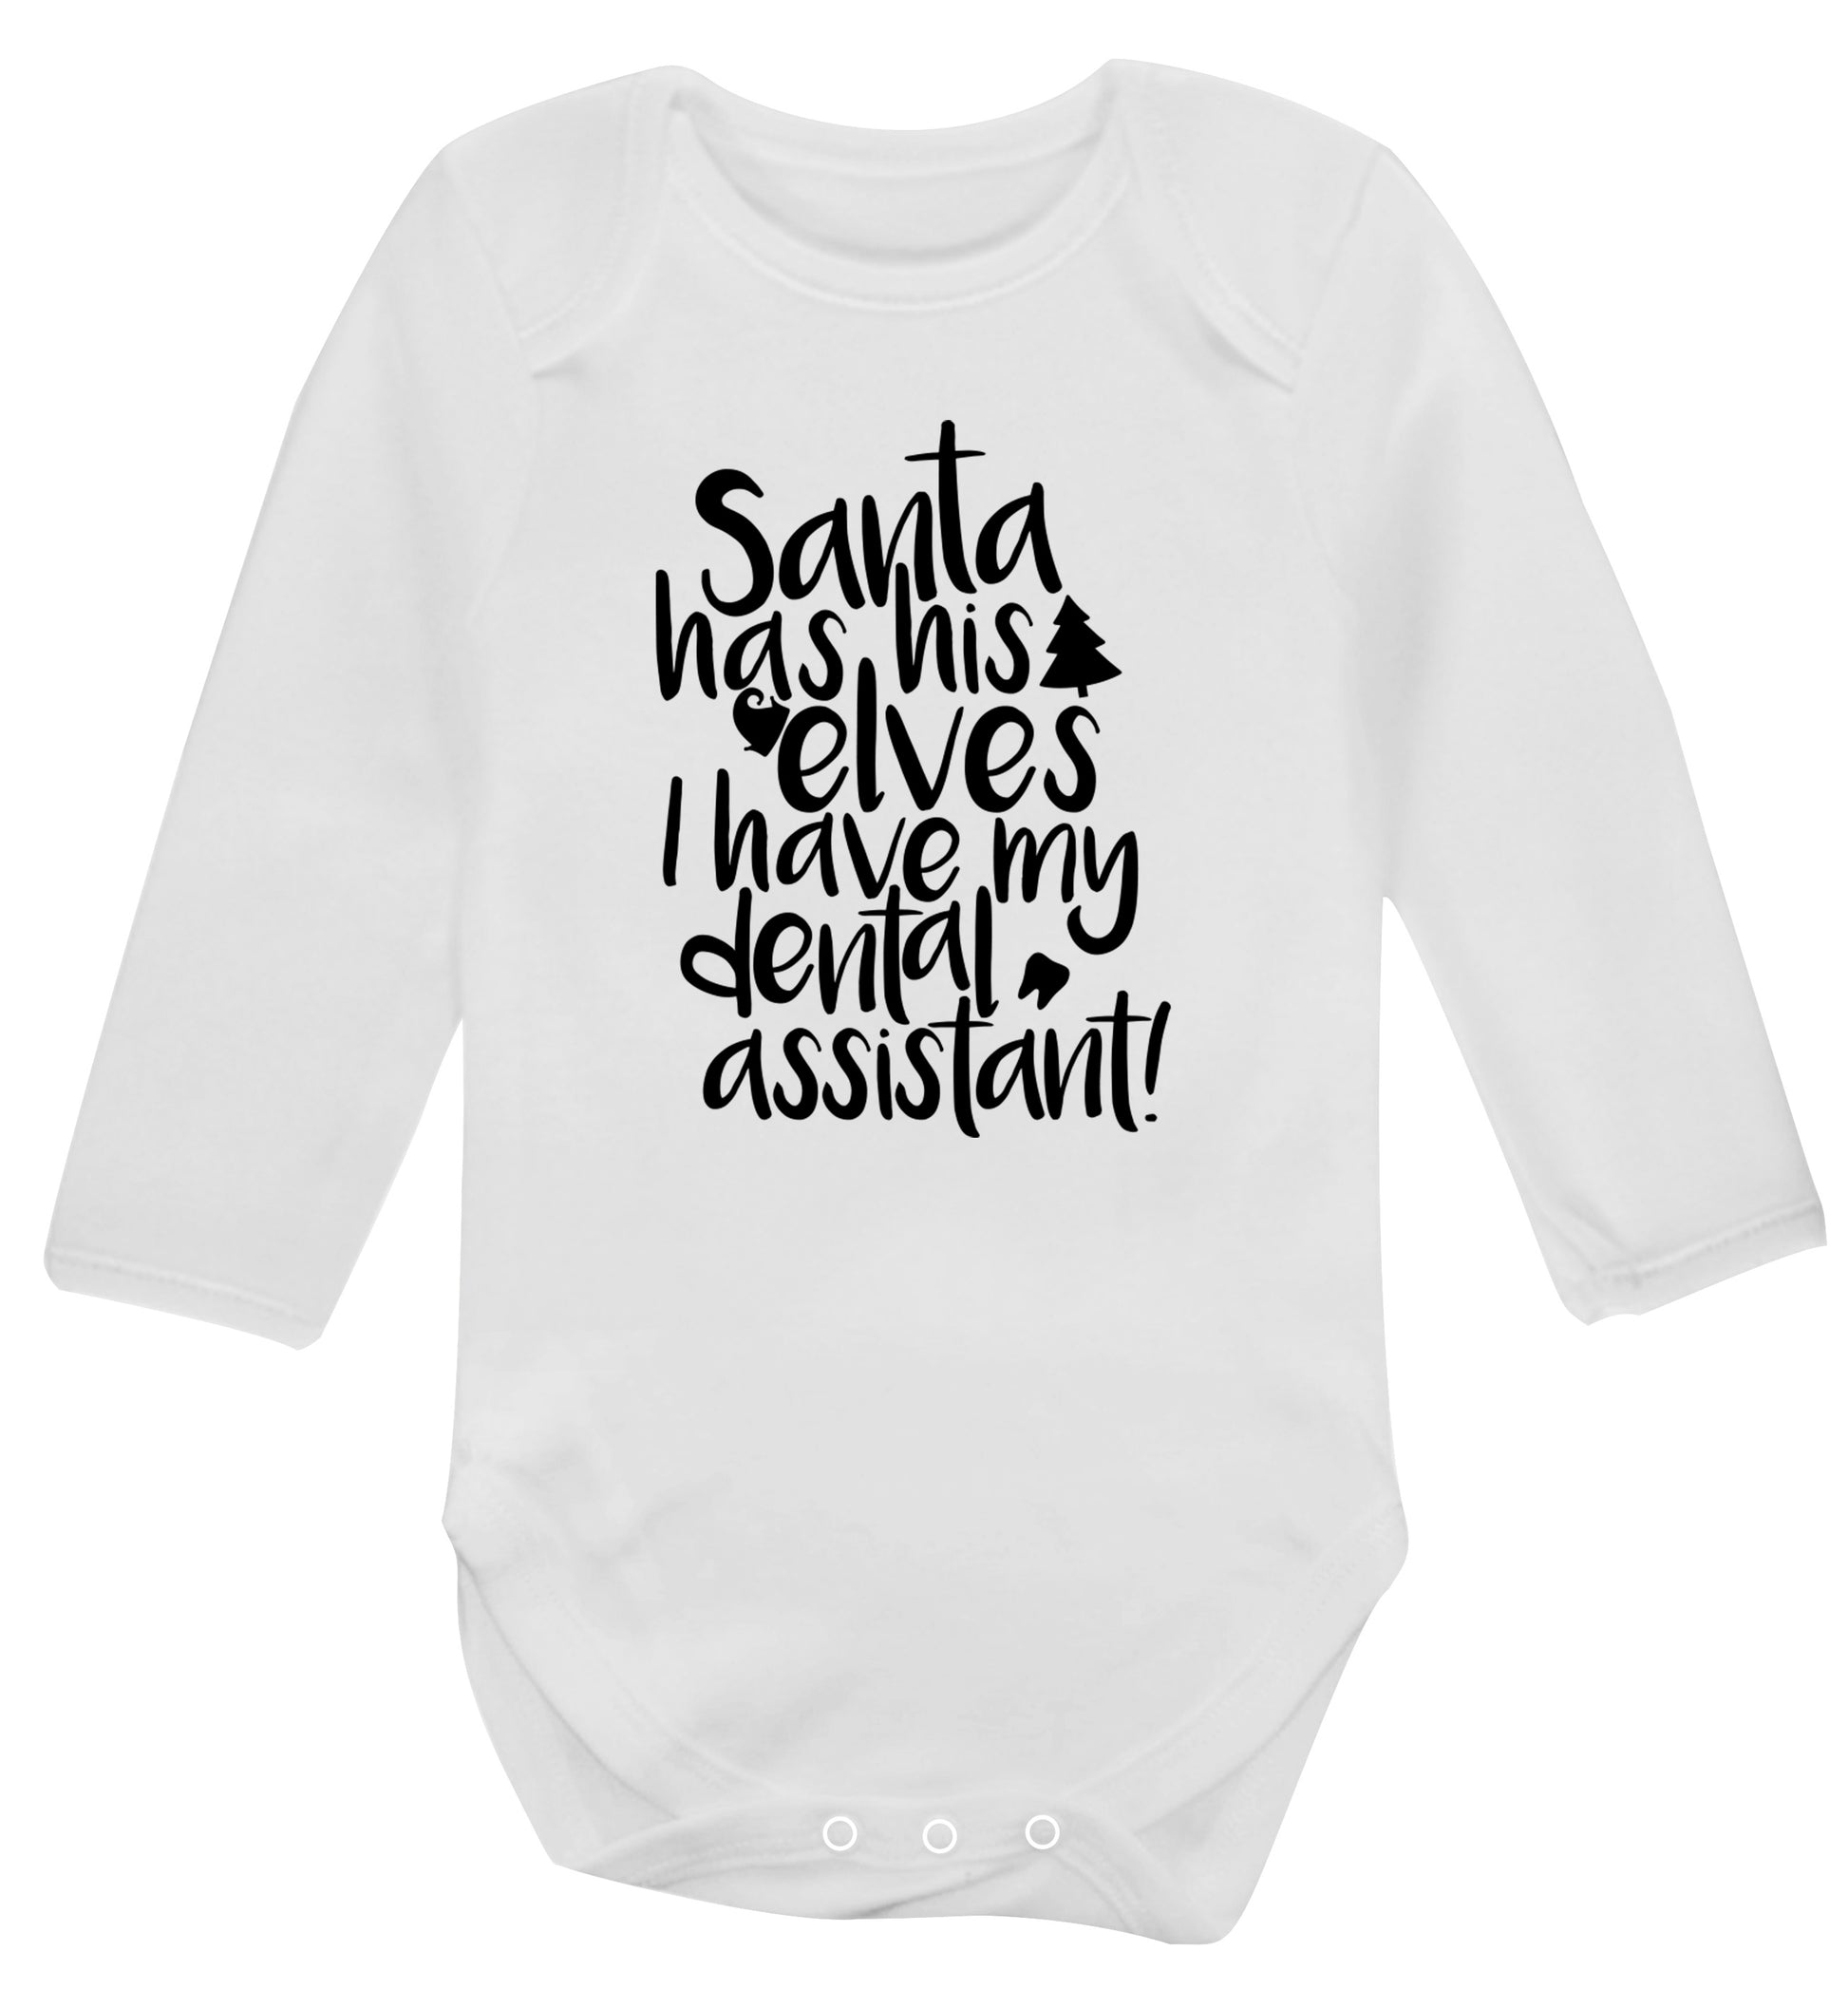 Santa has his elves I have my dental assistant Baby Vest long sleeved white 6-12 months